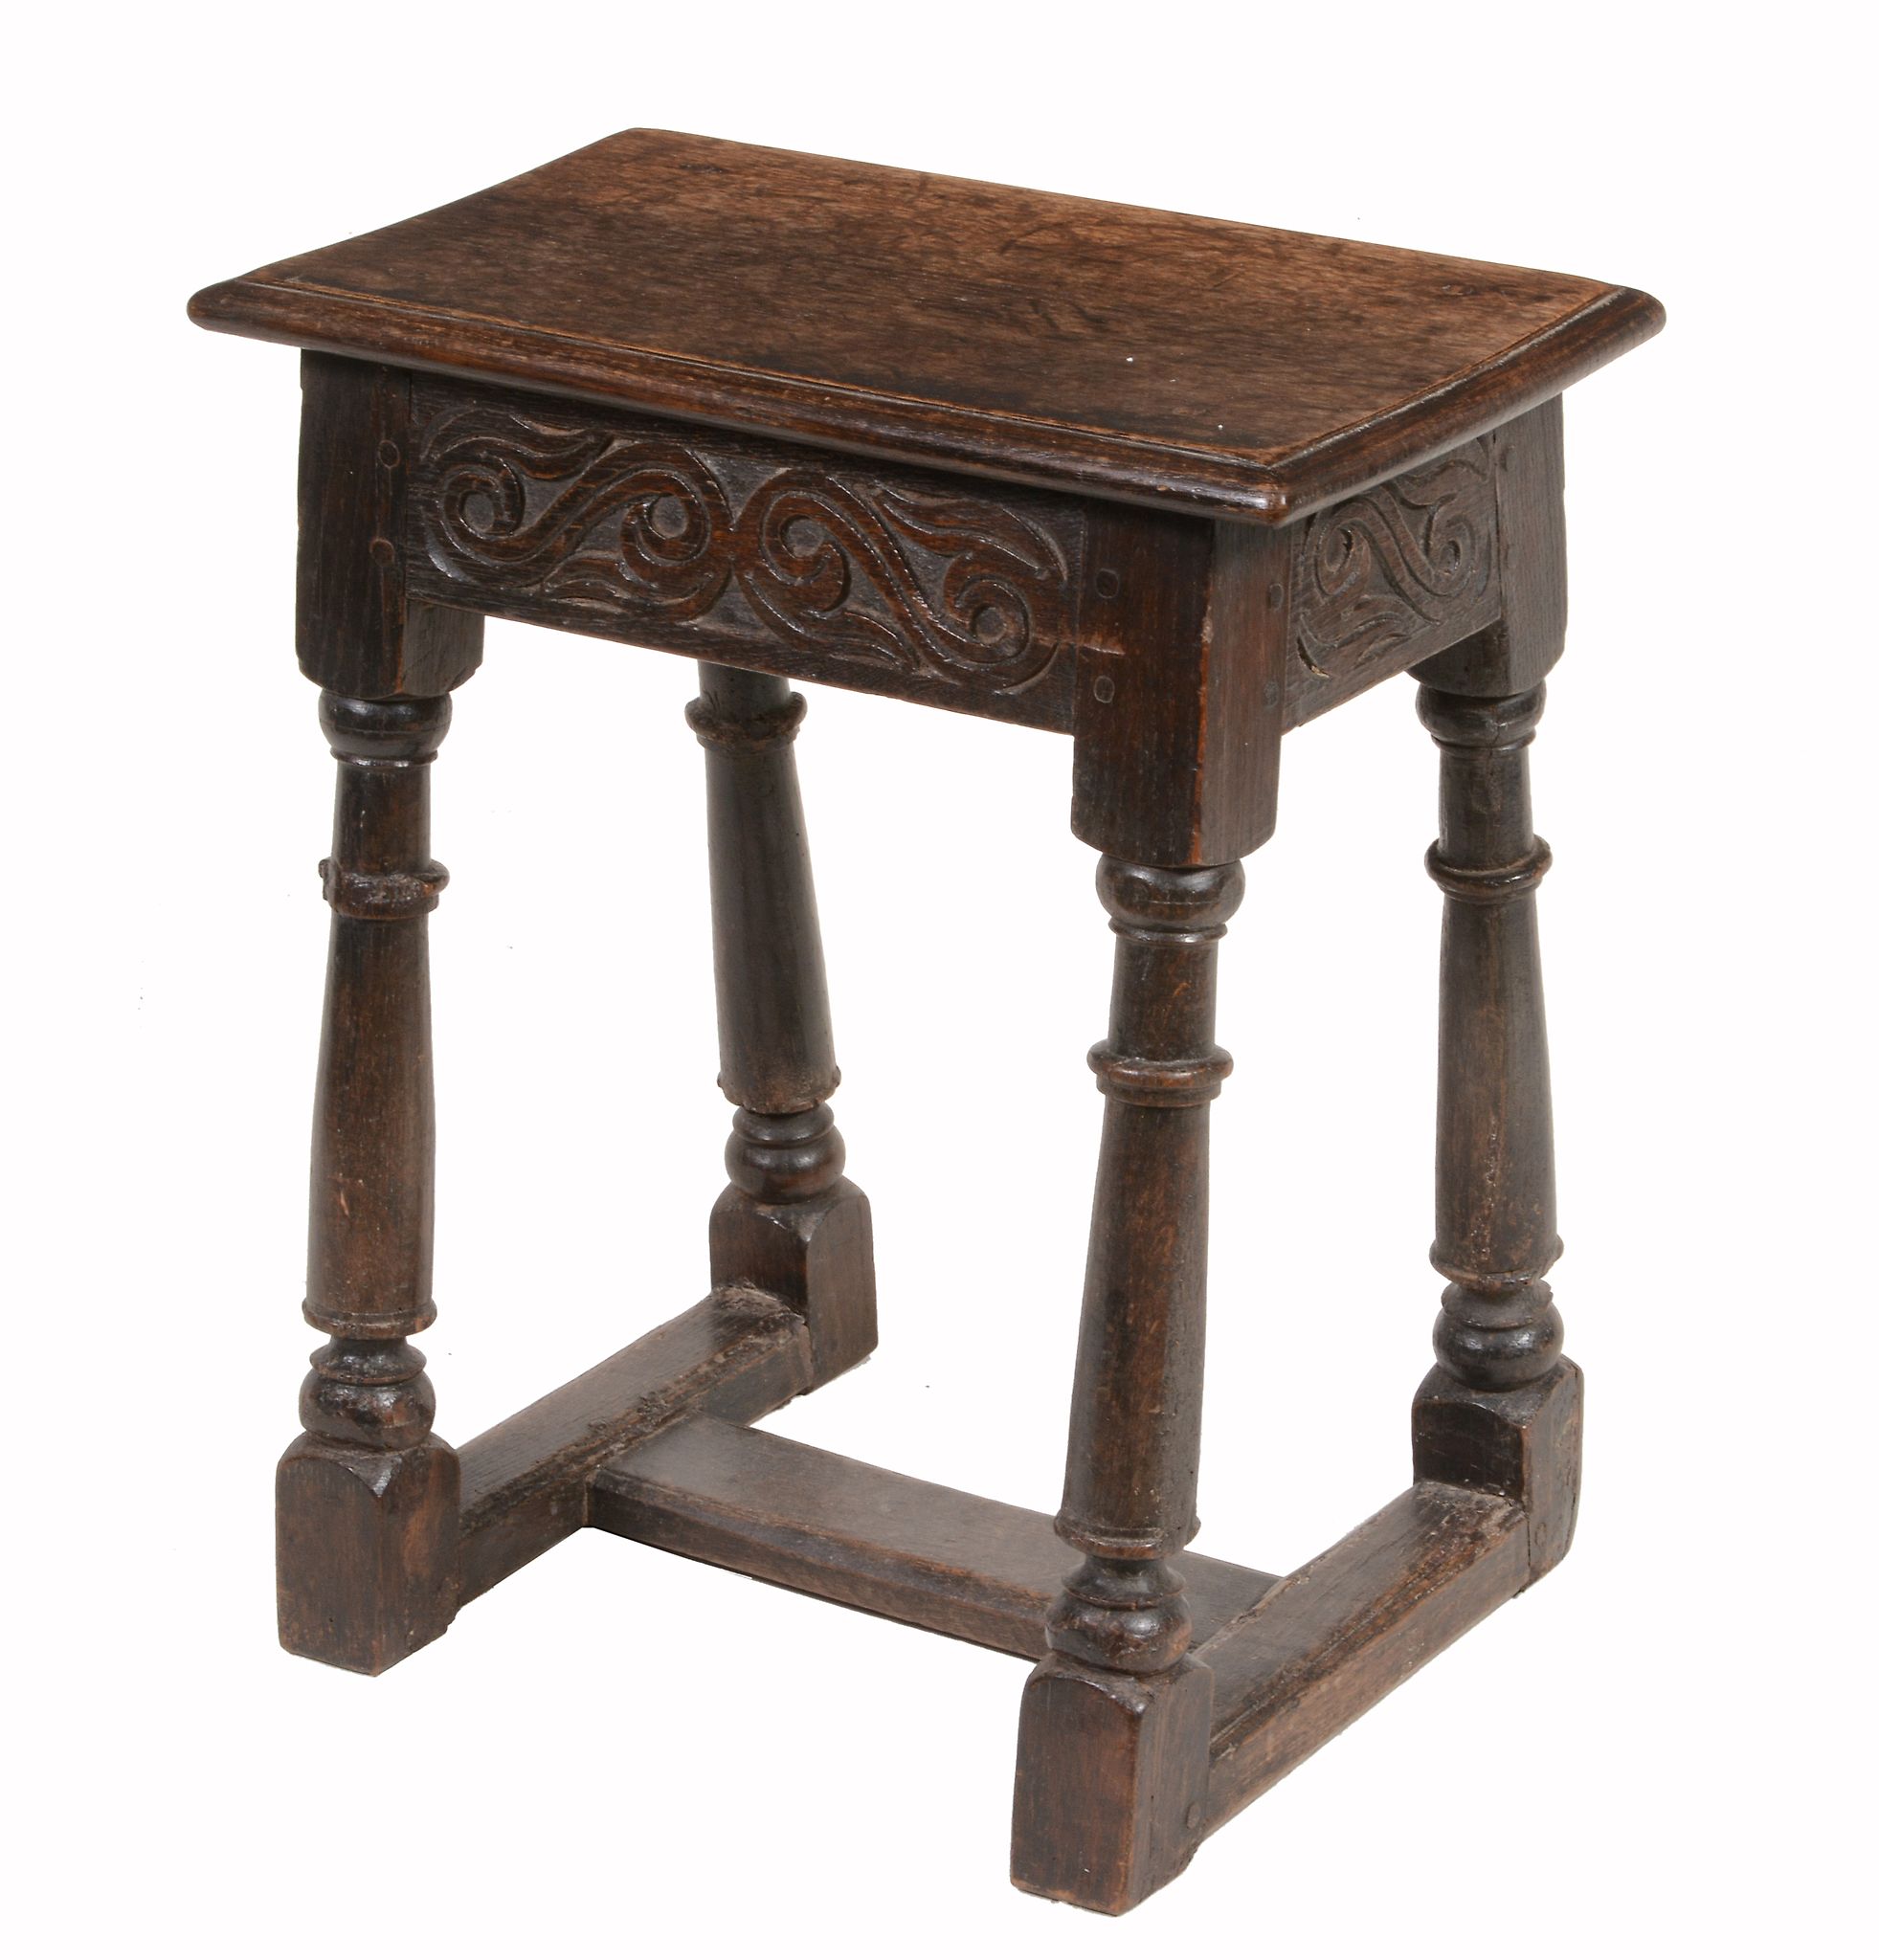 A Charles II oak joint stool  , circa 1660, the seat with moulded edge above a freize with scroll